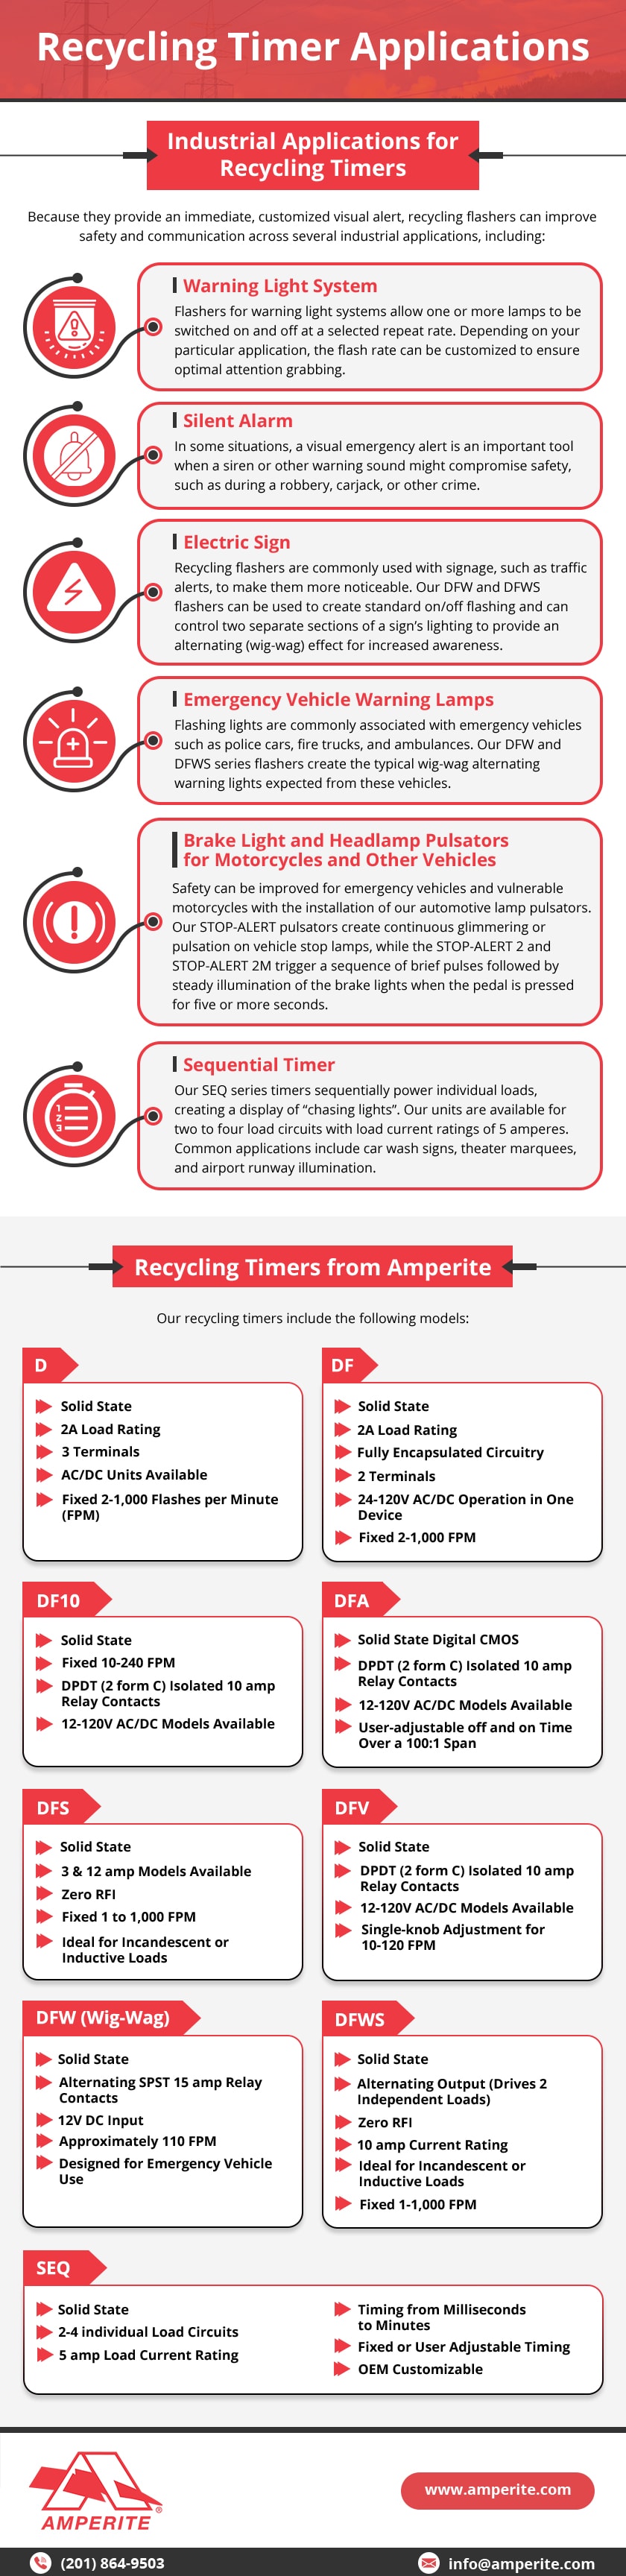 Recycling Timer Applications